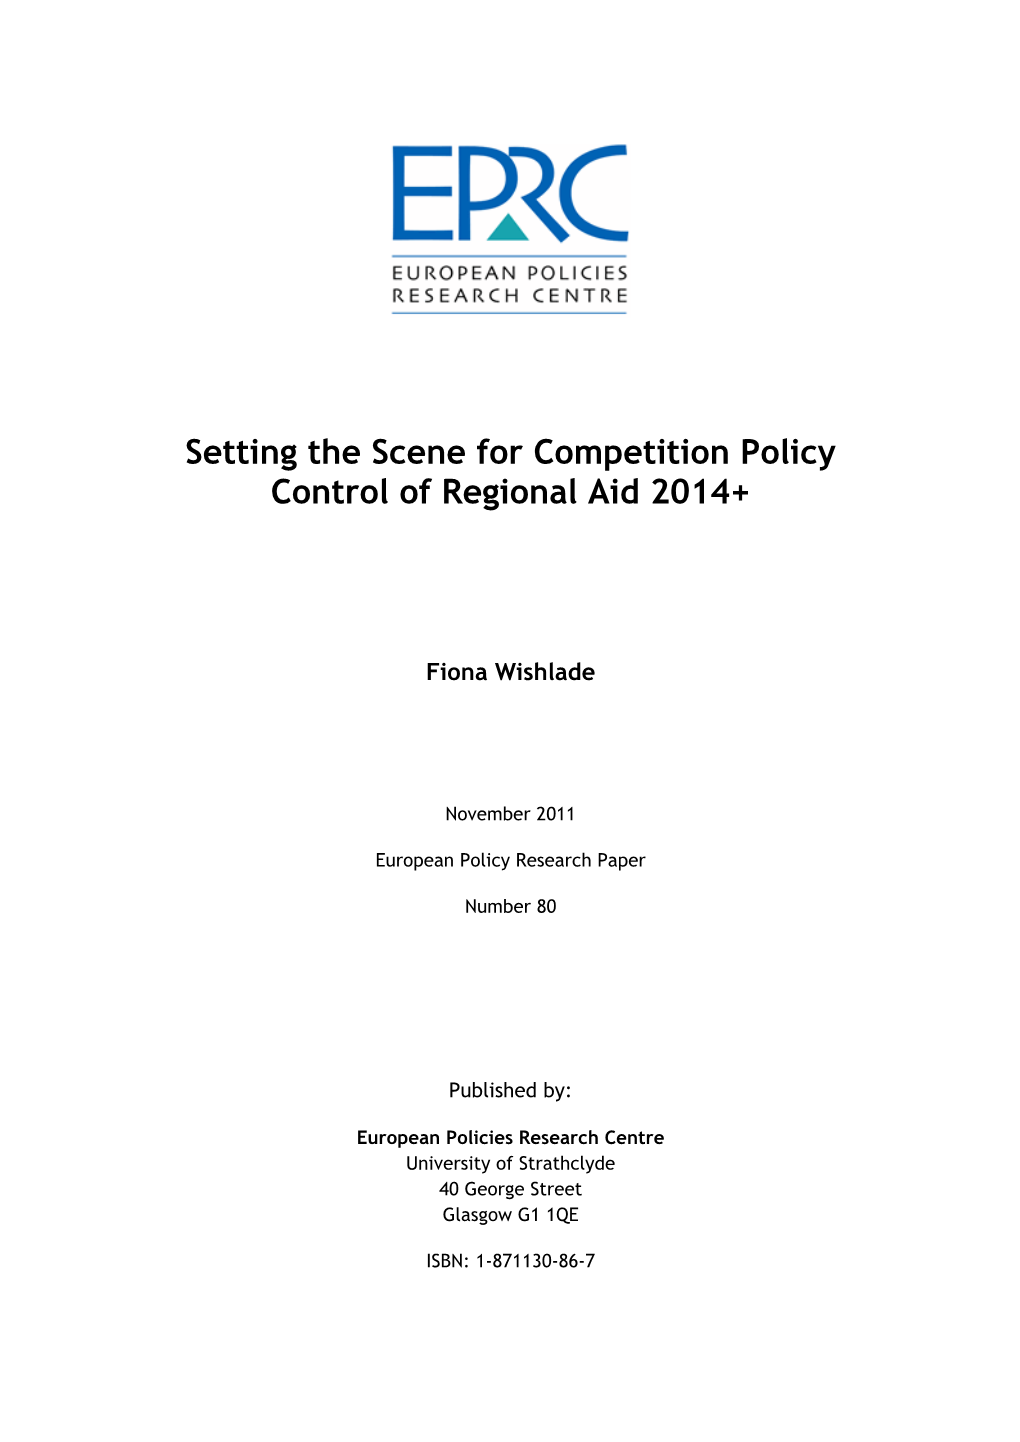 Setting the Scene for Competition Policy Control of Regional Aid 2014+